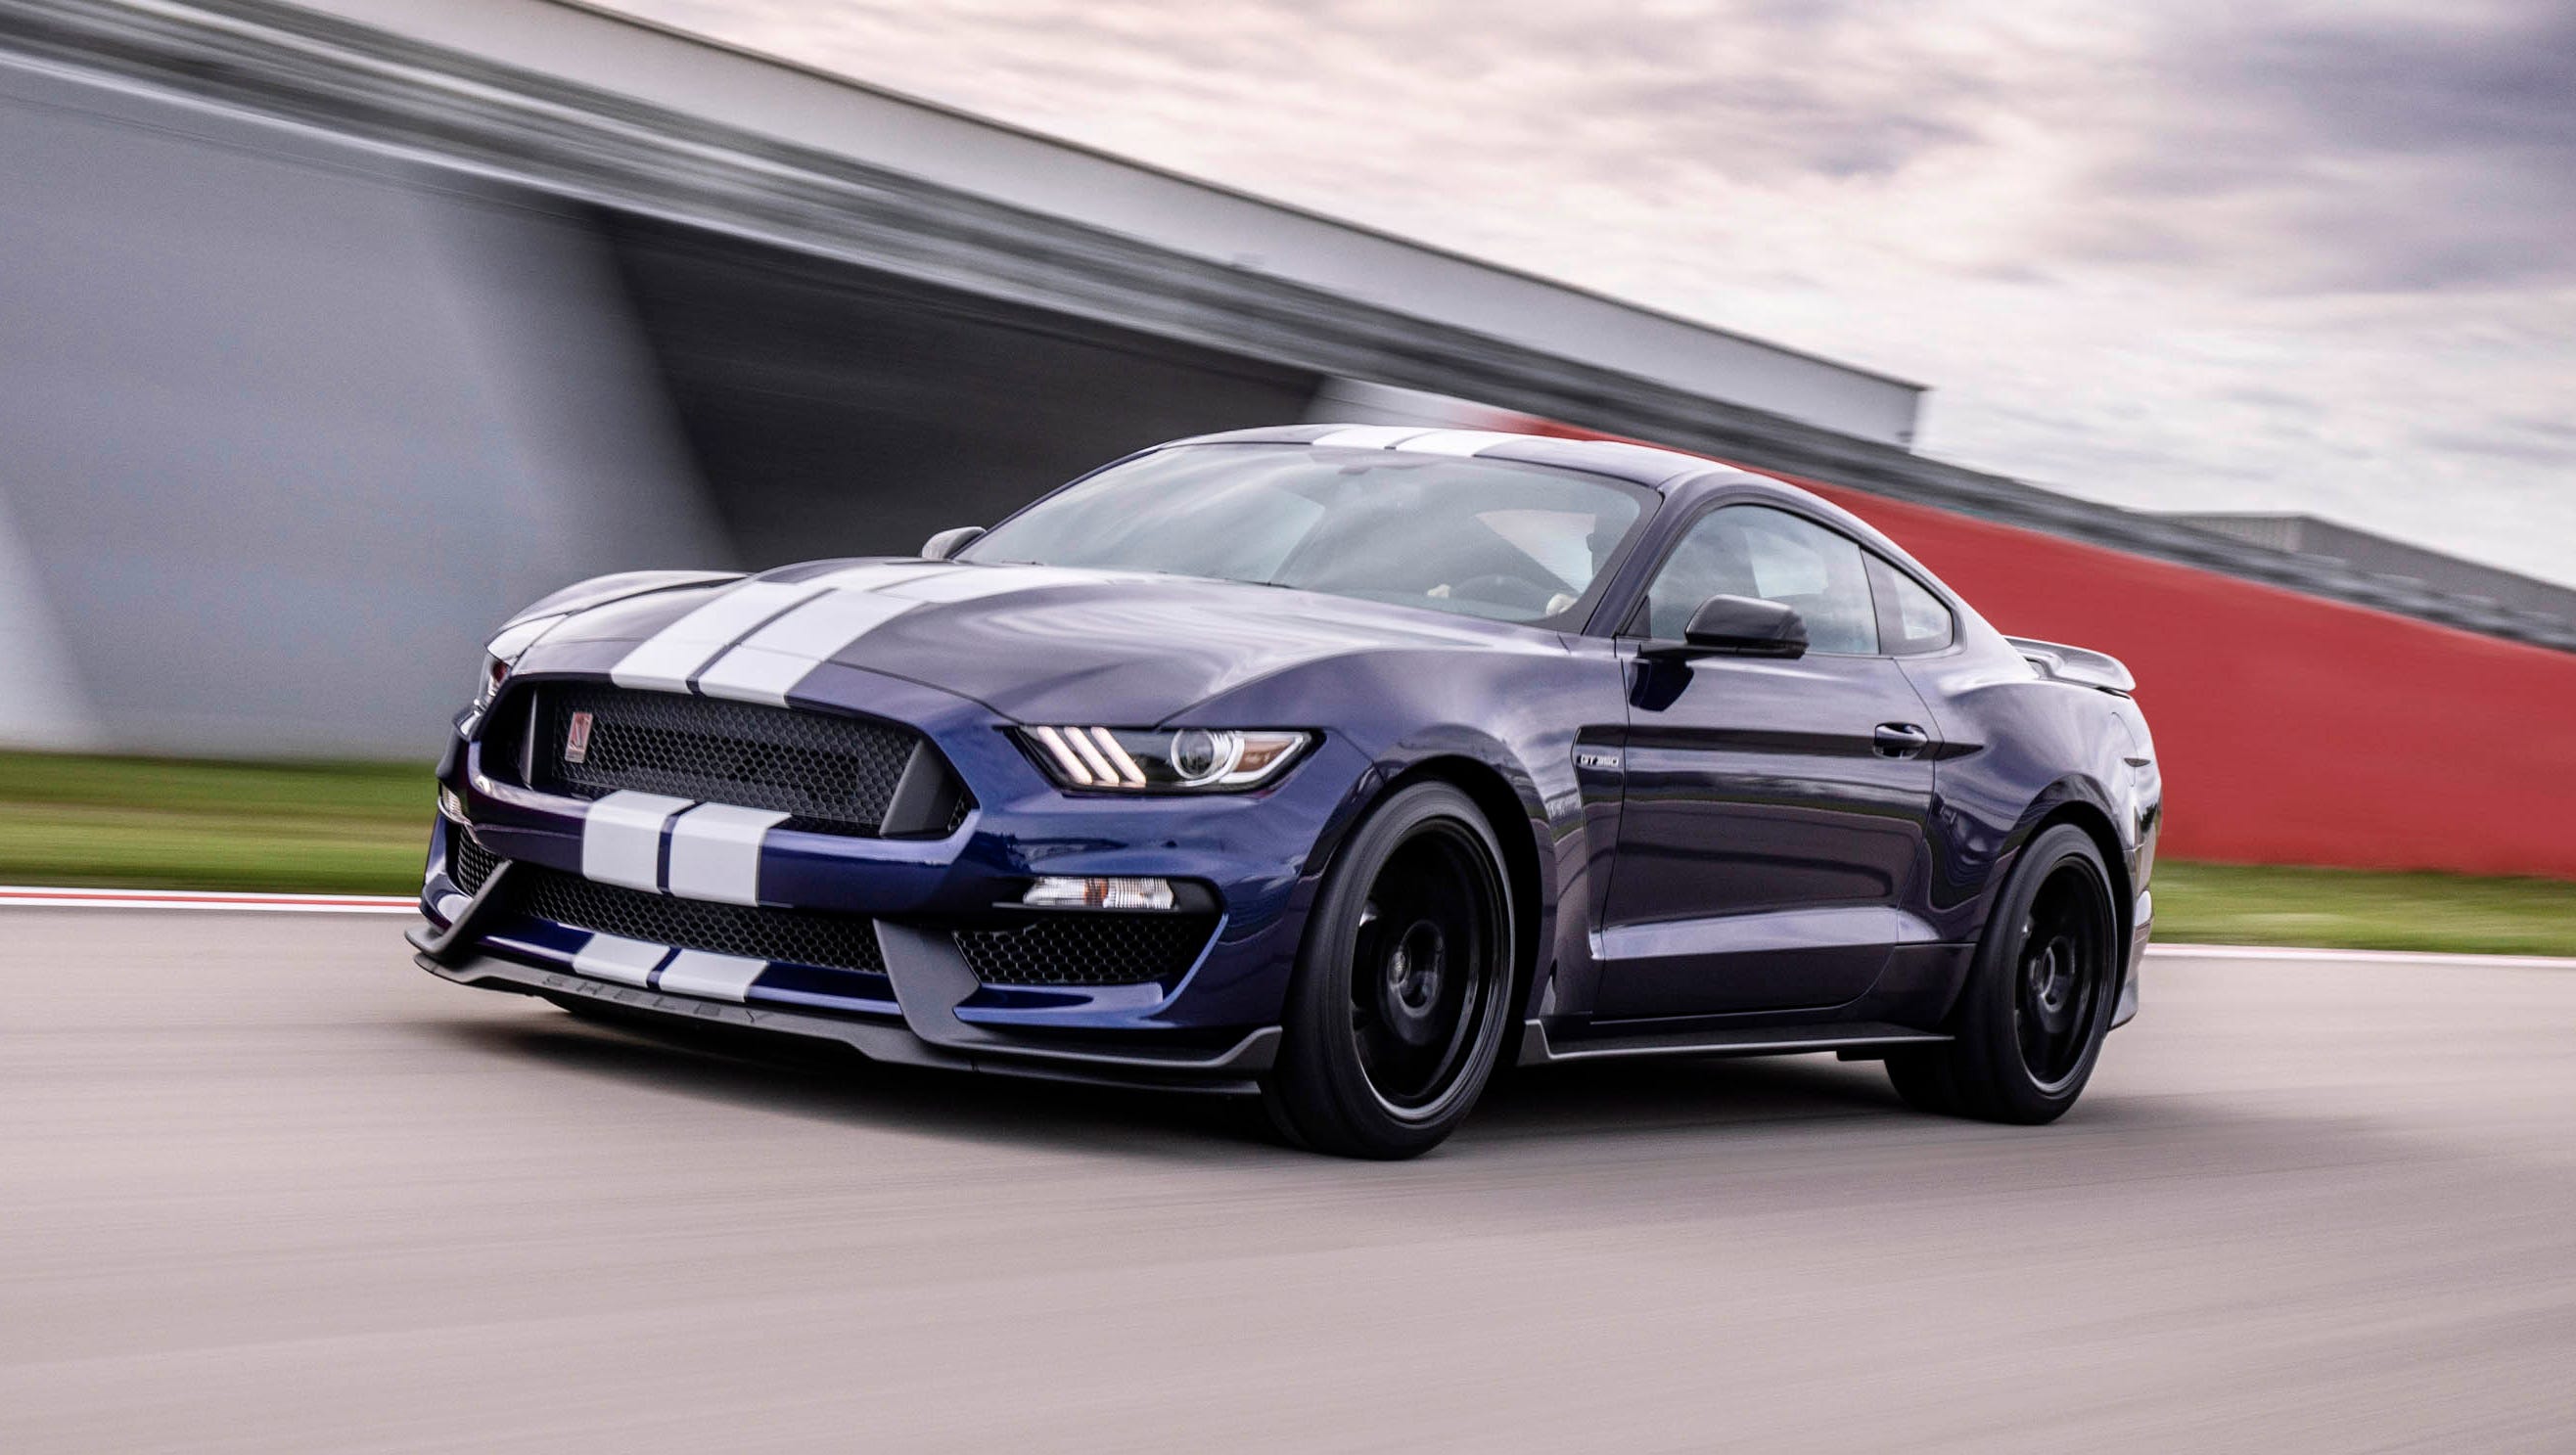 Ford reveals 2019 Shelby GT350 Mustang with upgrades